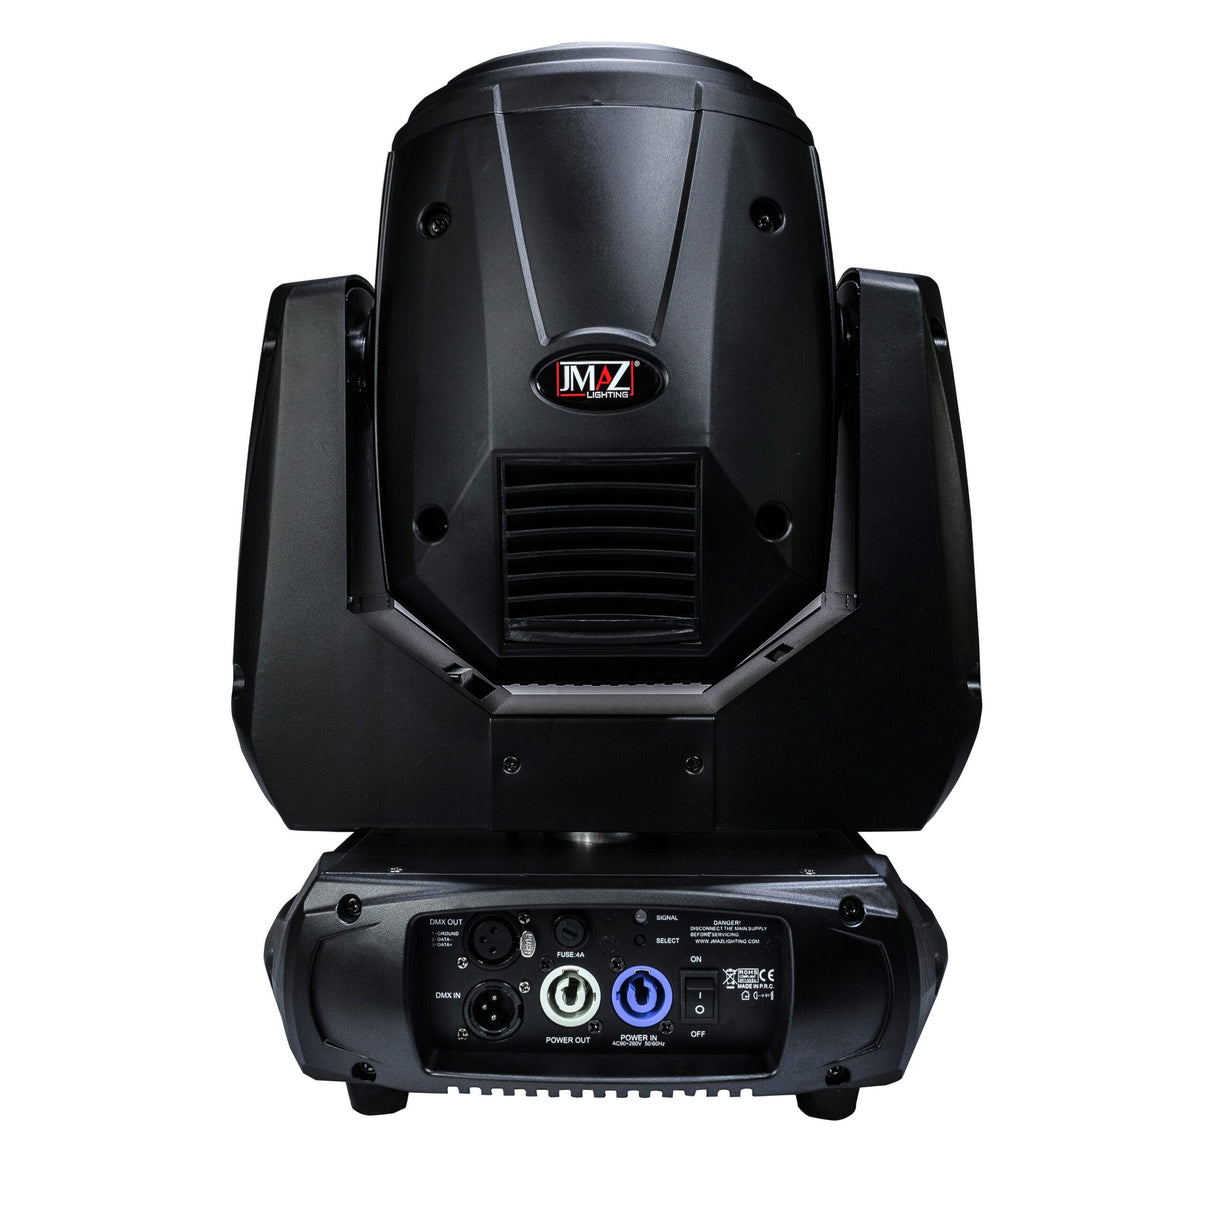 JMAZ Attco Beam 230 LED Moving Head Beam with Prism